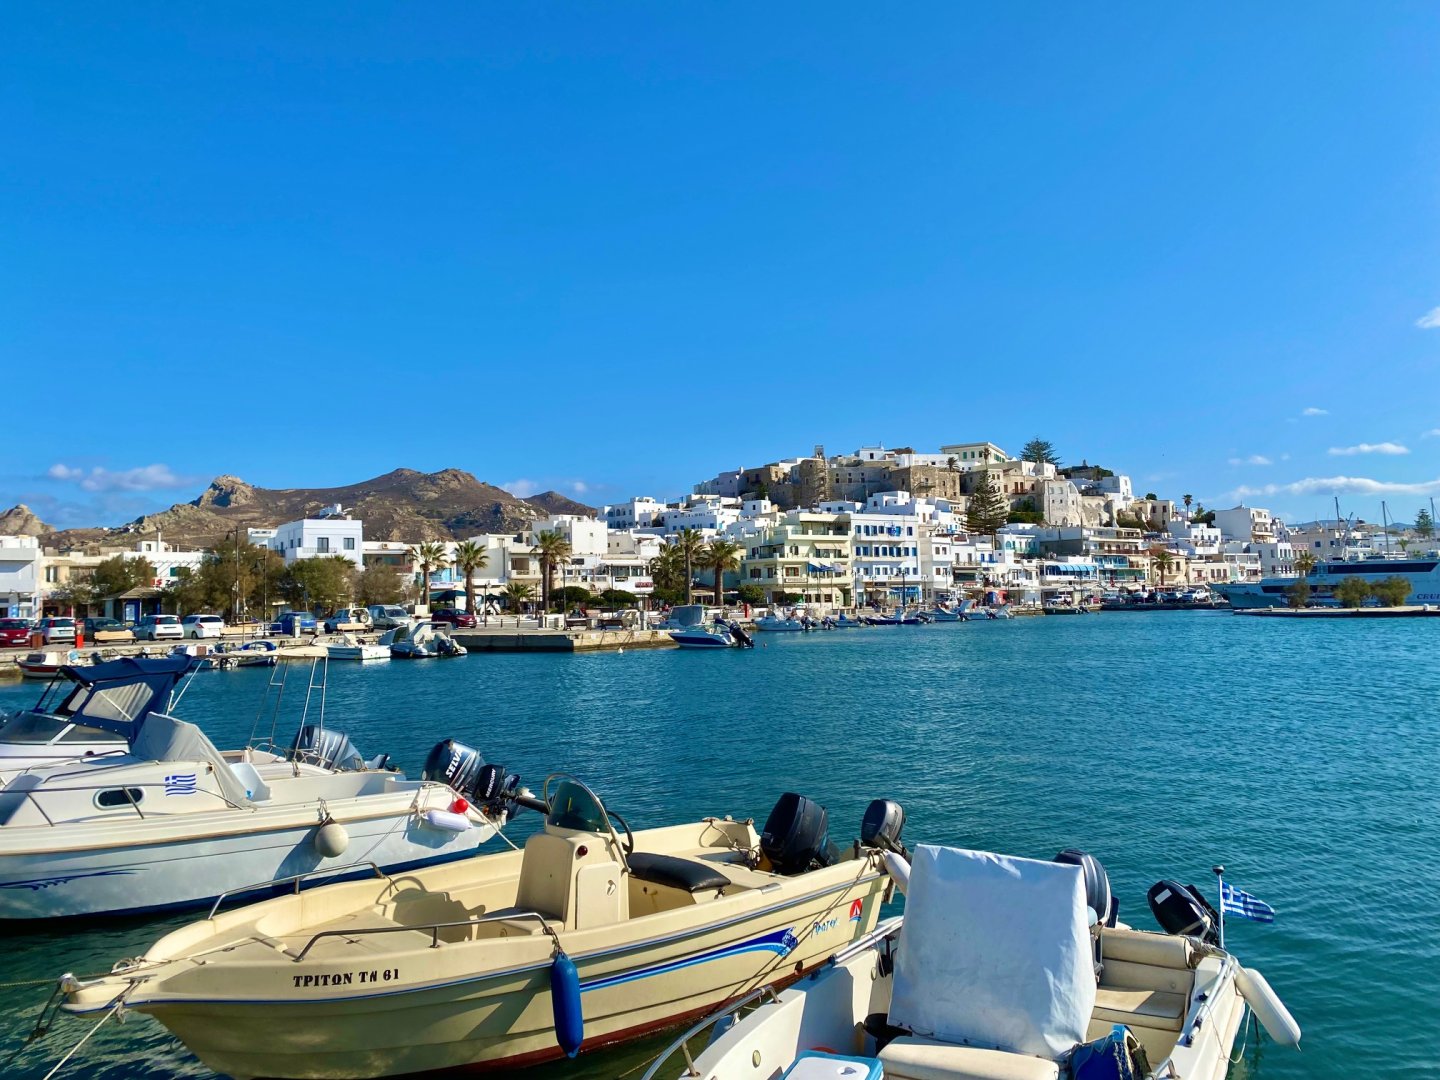 Small speed boats in the harbour with Chora Naxos on the hill behind